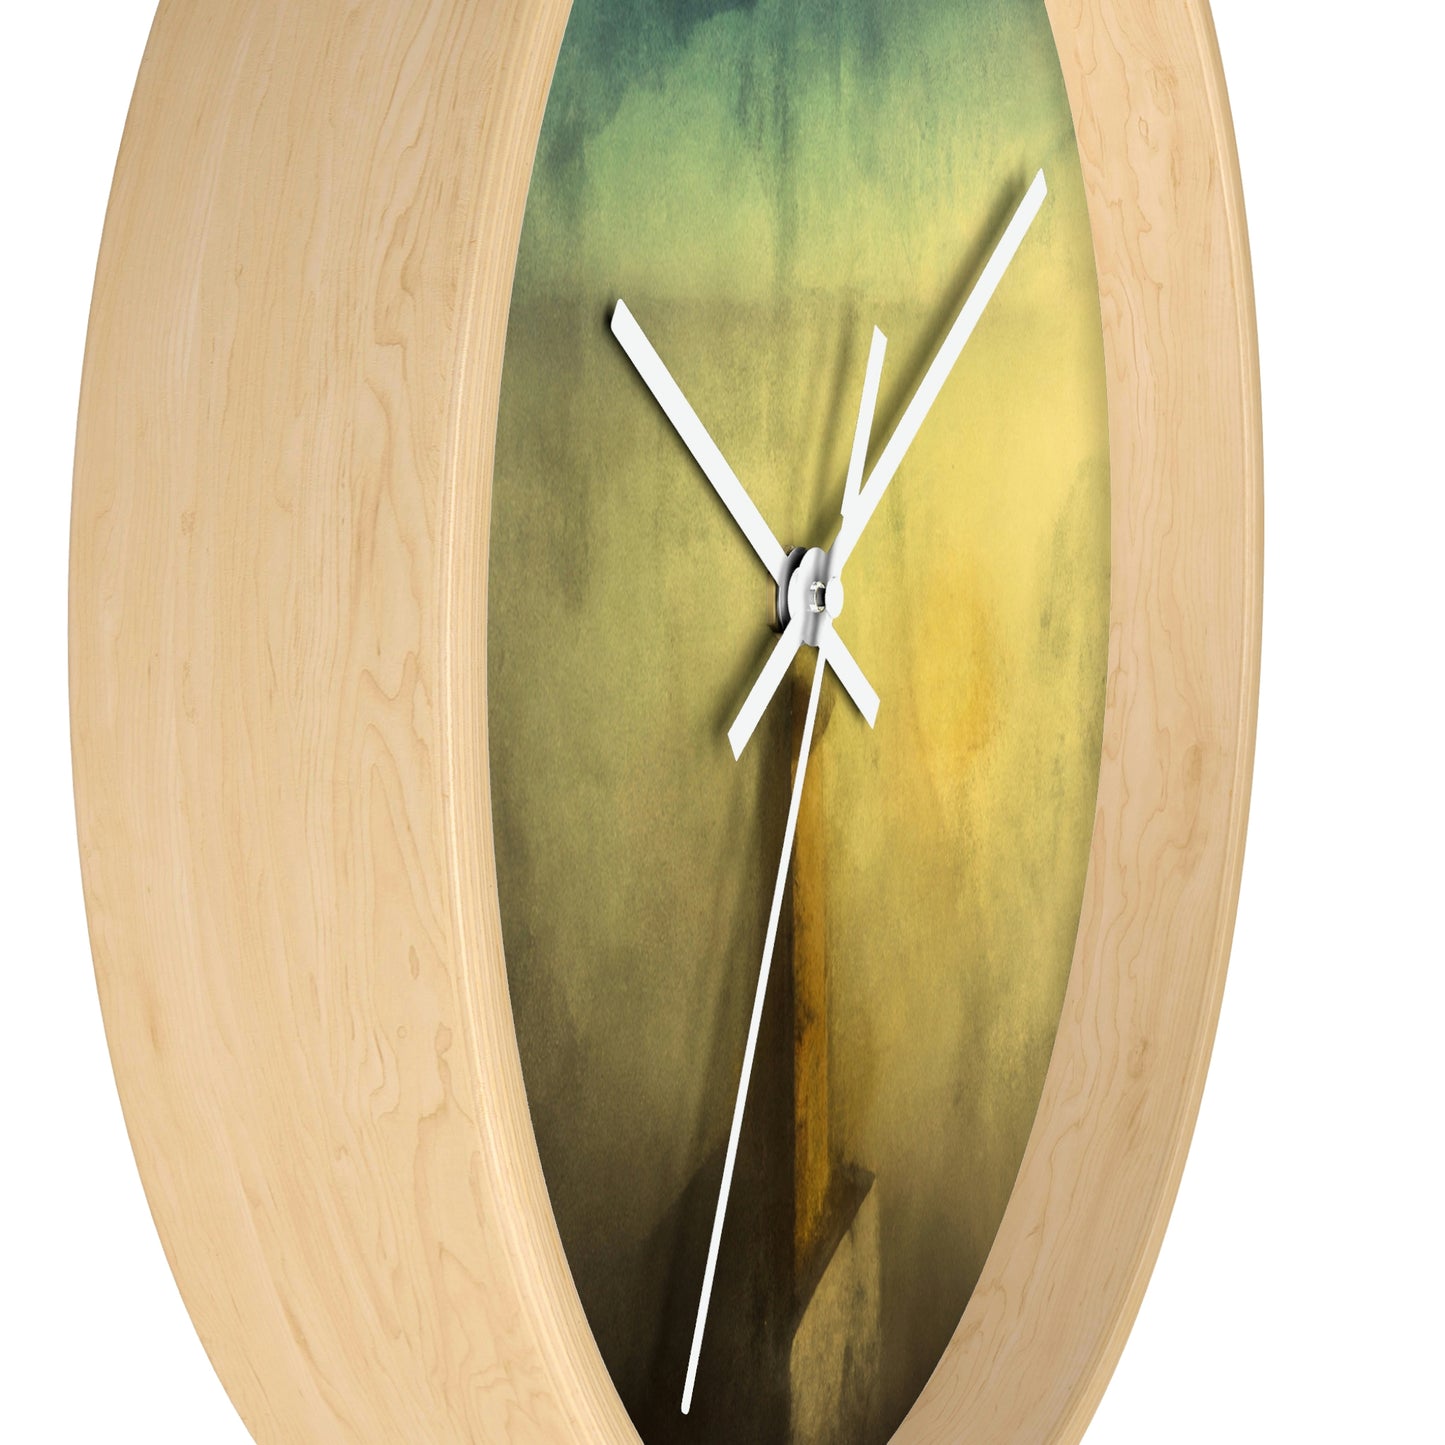 "The Dismal Lighthouse of the Mist" - The Alien Wall Clock